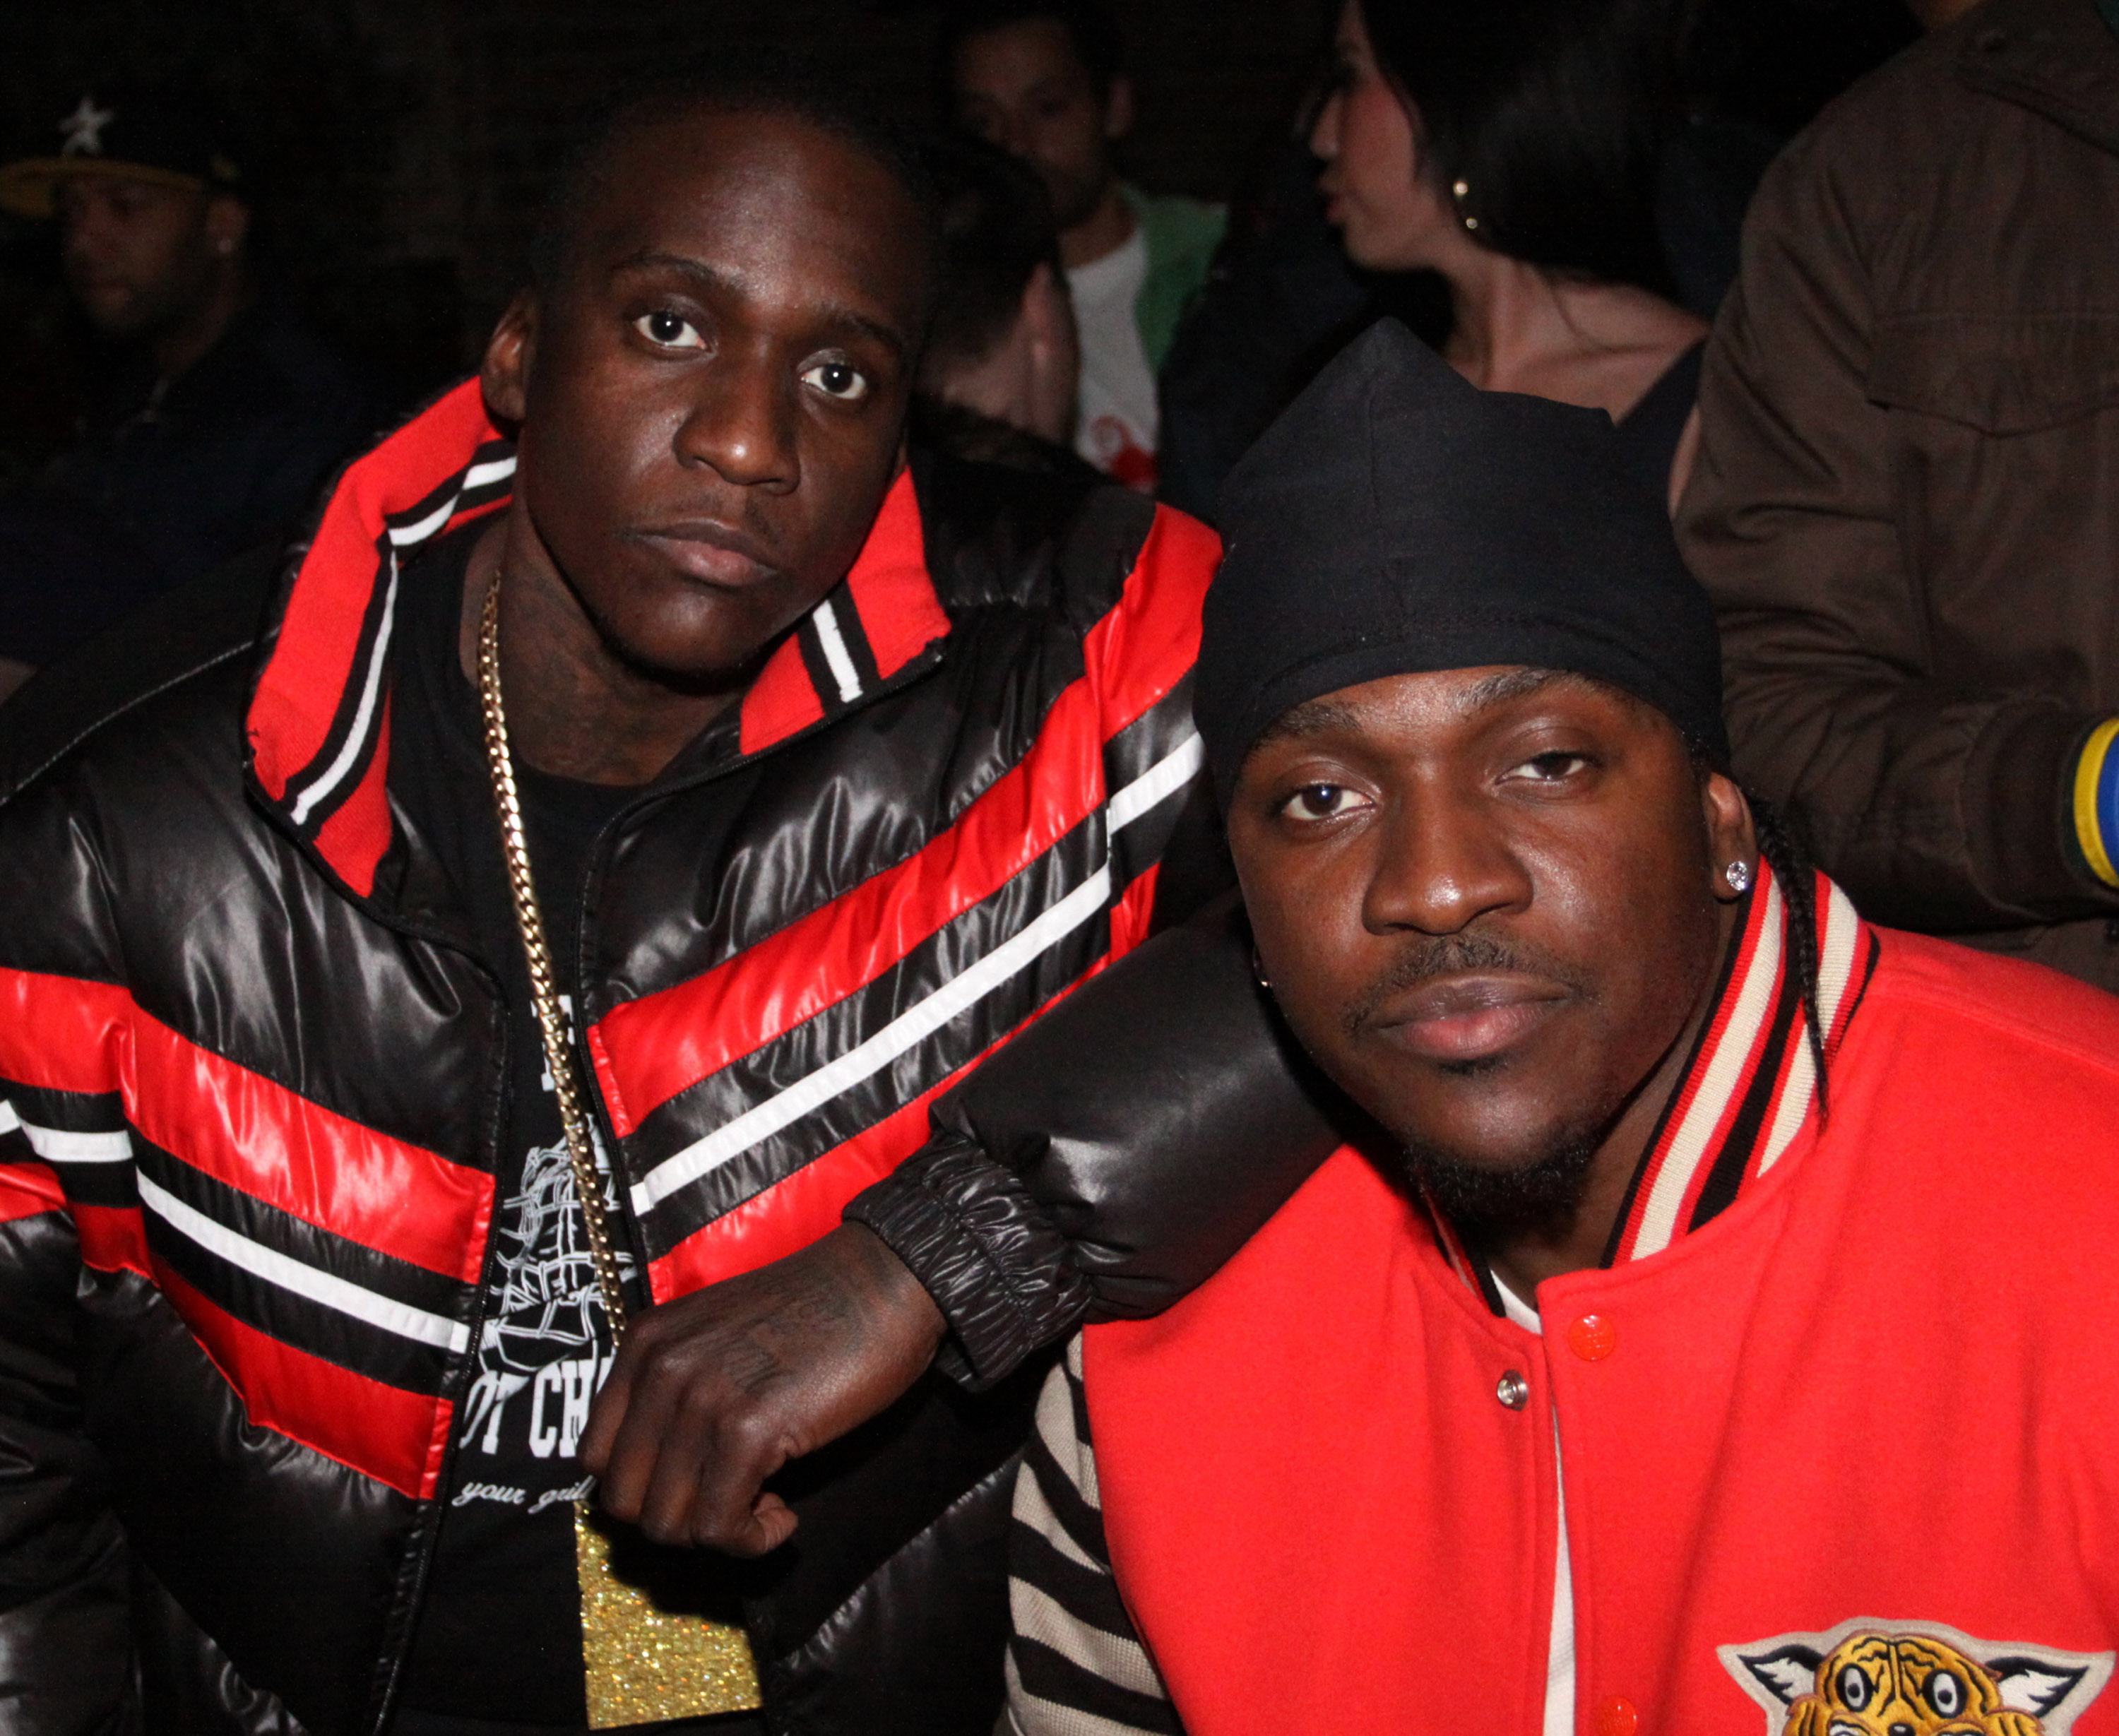 Pusha T On A Potential Clipse Reunion: “It’s Really Up To My Brother”